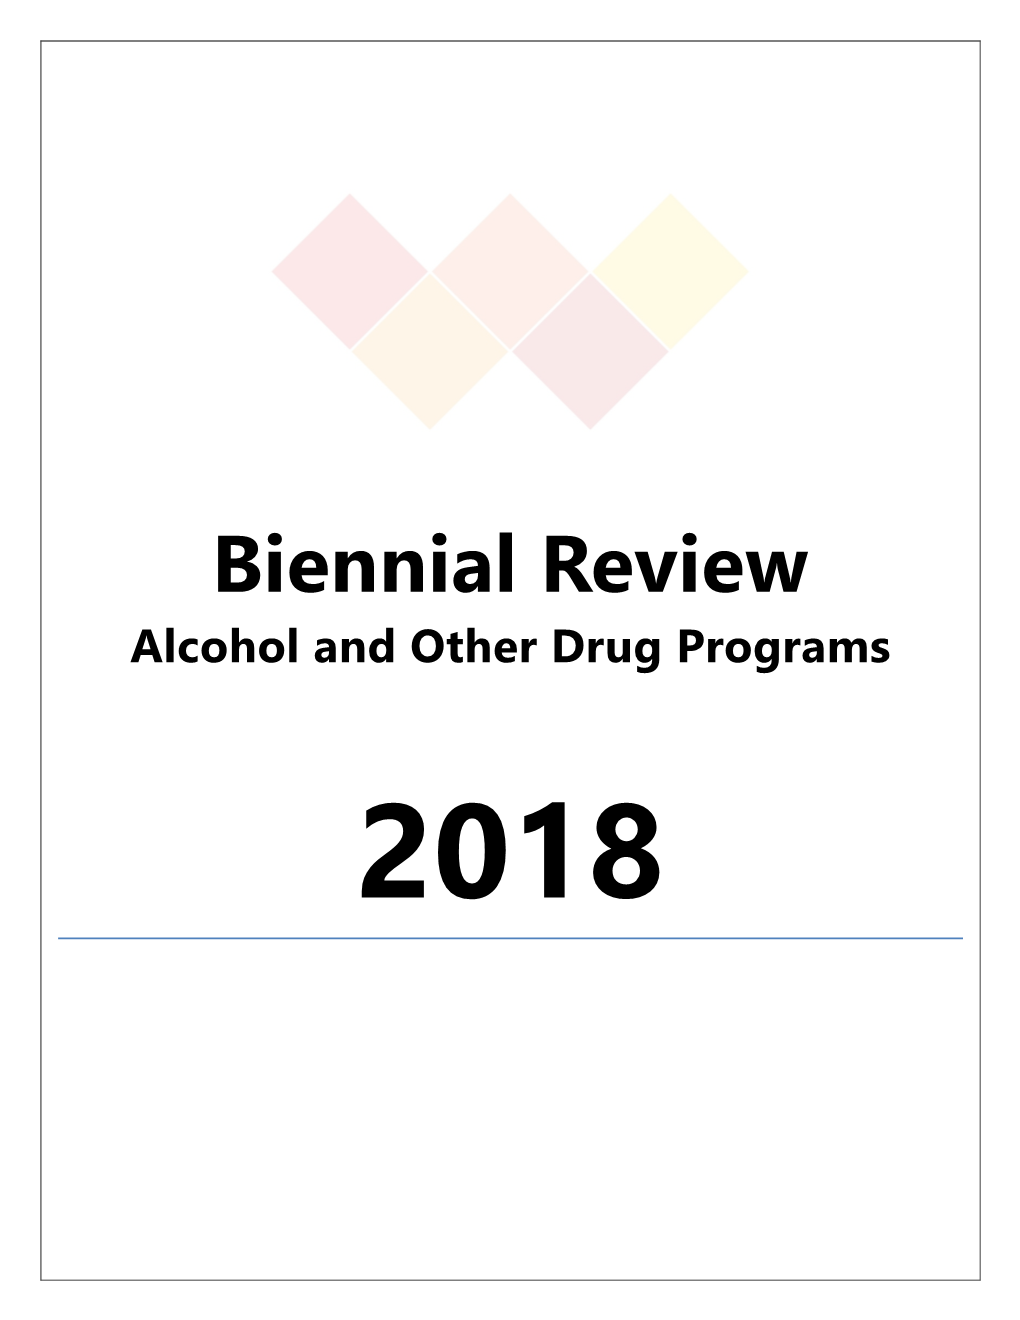 Biennial Review Alcohol and Other Drug Programs